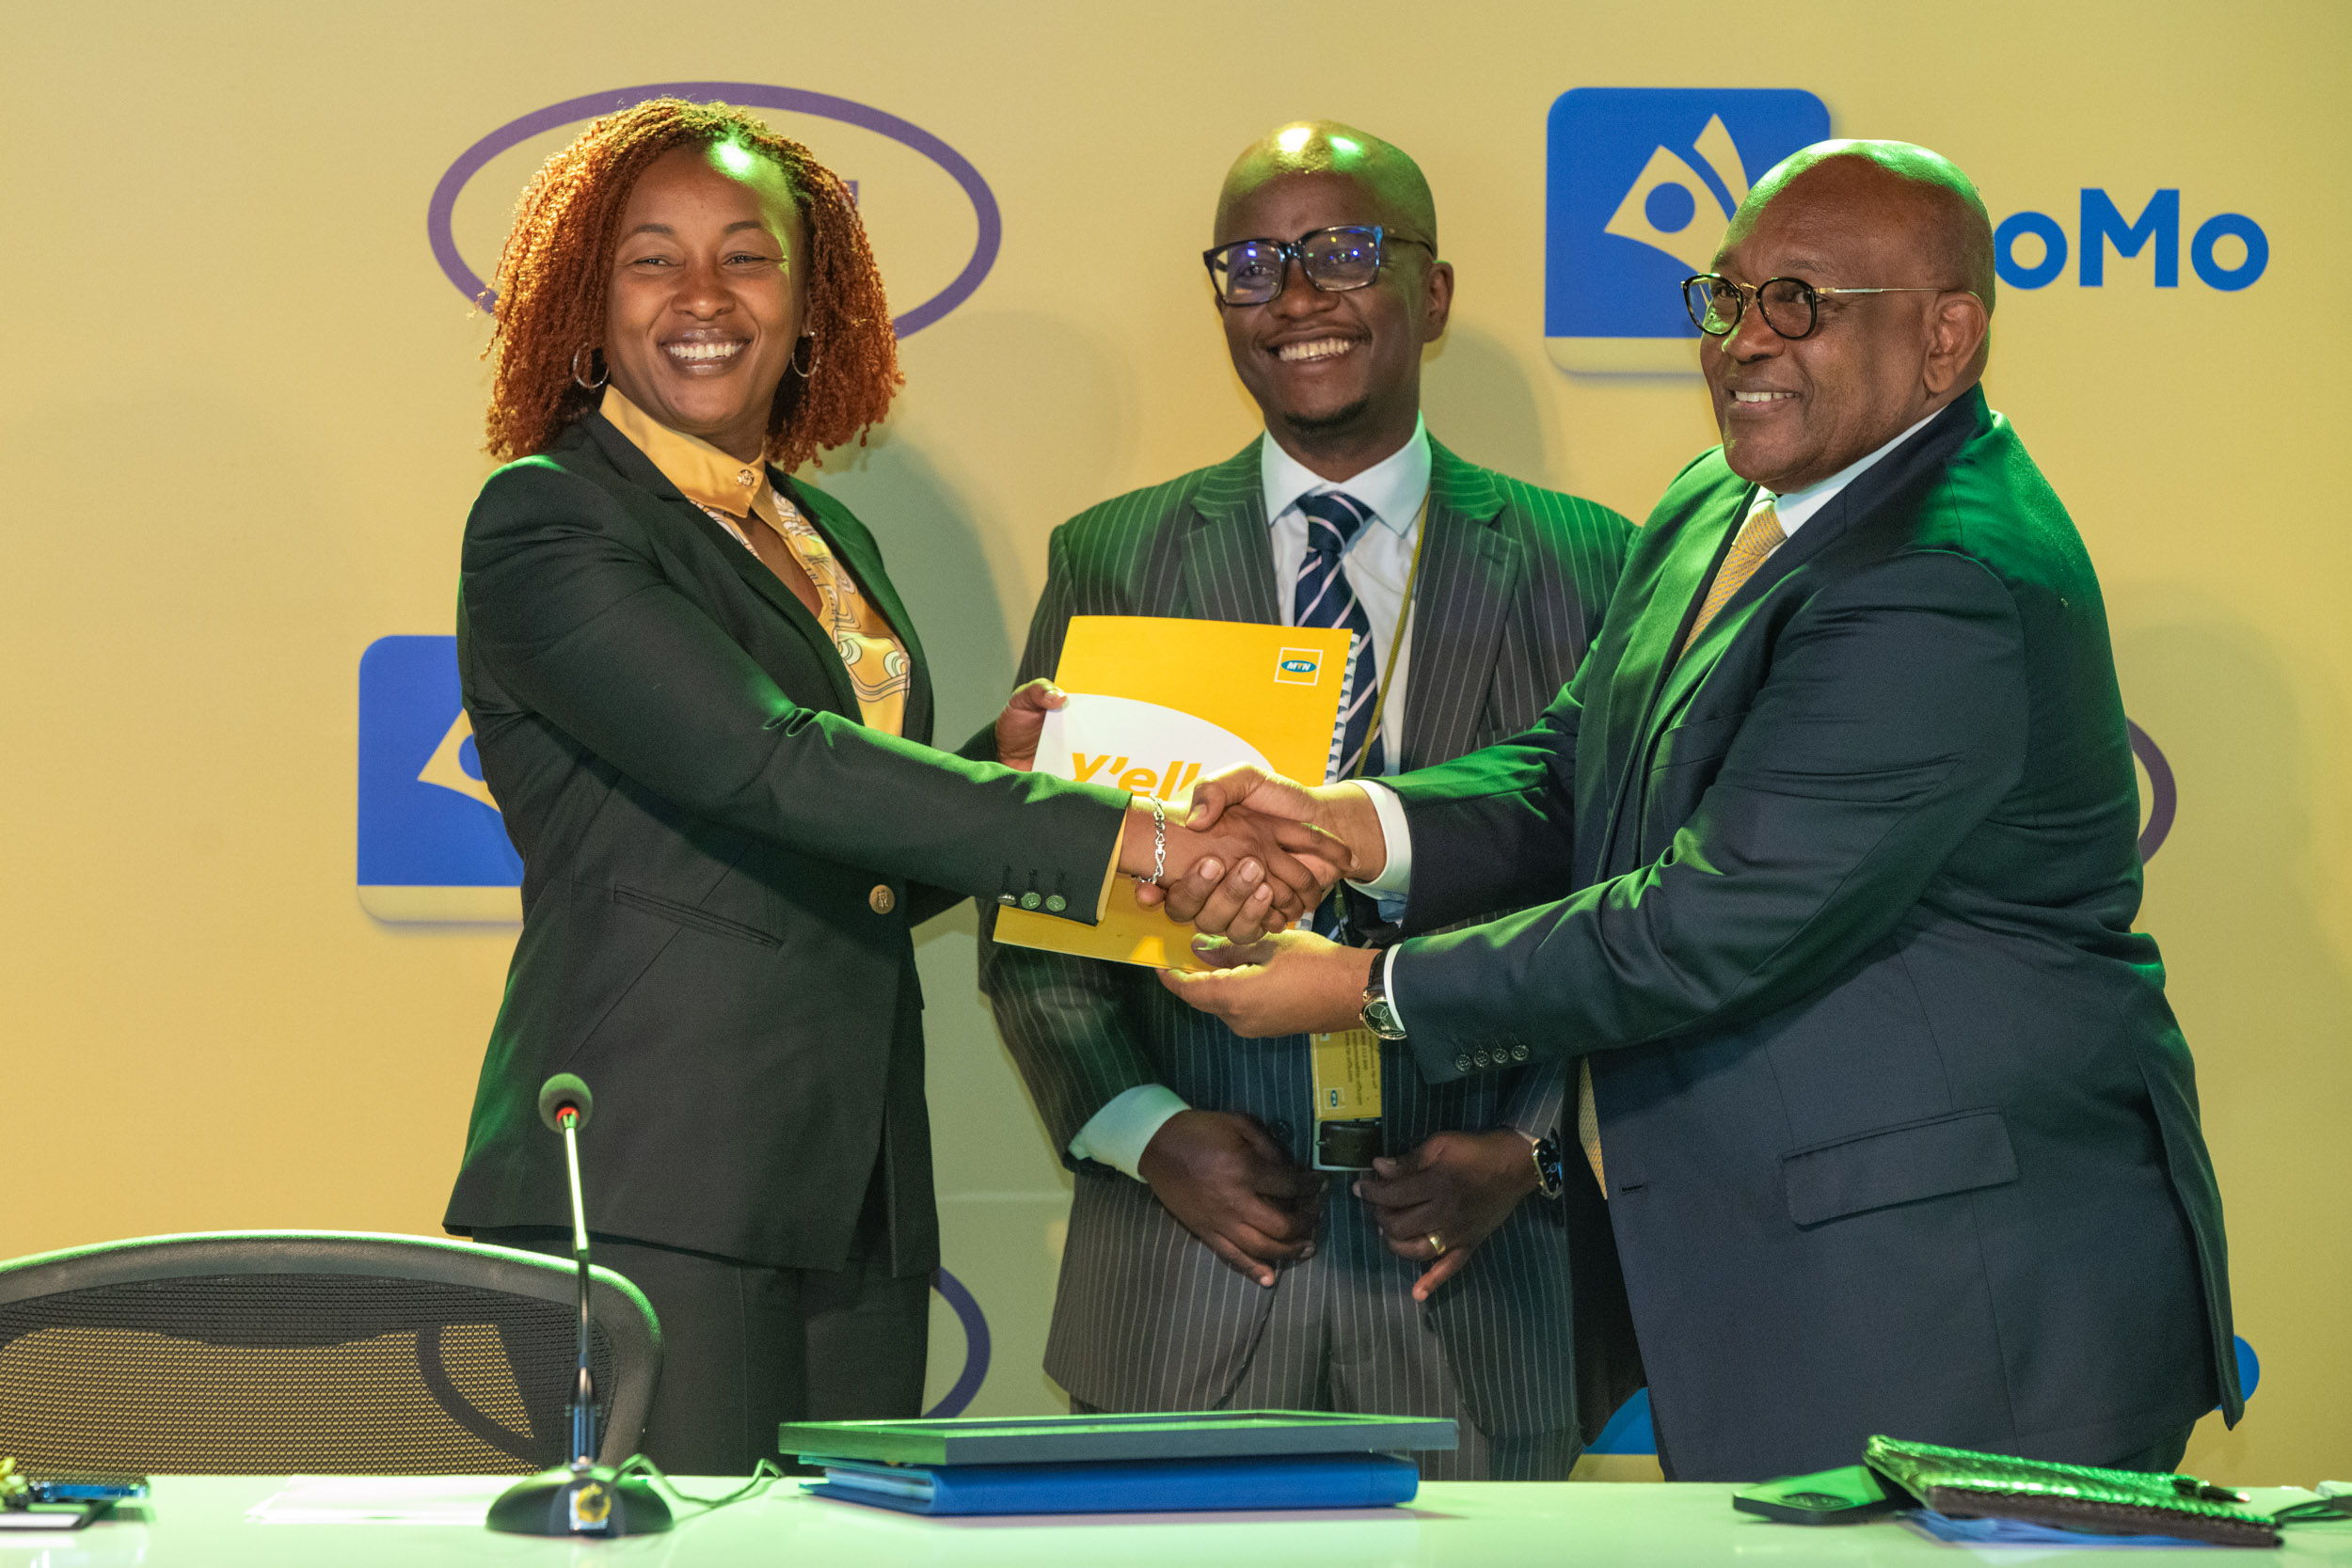 Sylvia Mulinge Promises To Focus On Digital Solutions In Her MTN Role